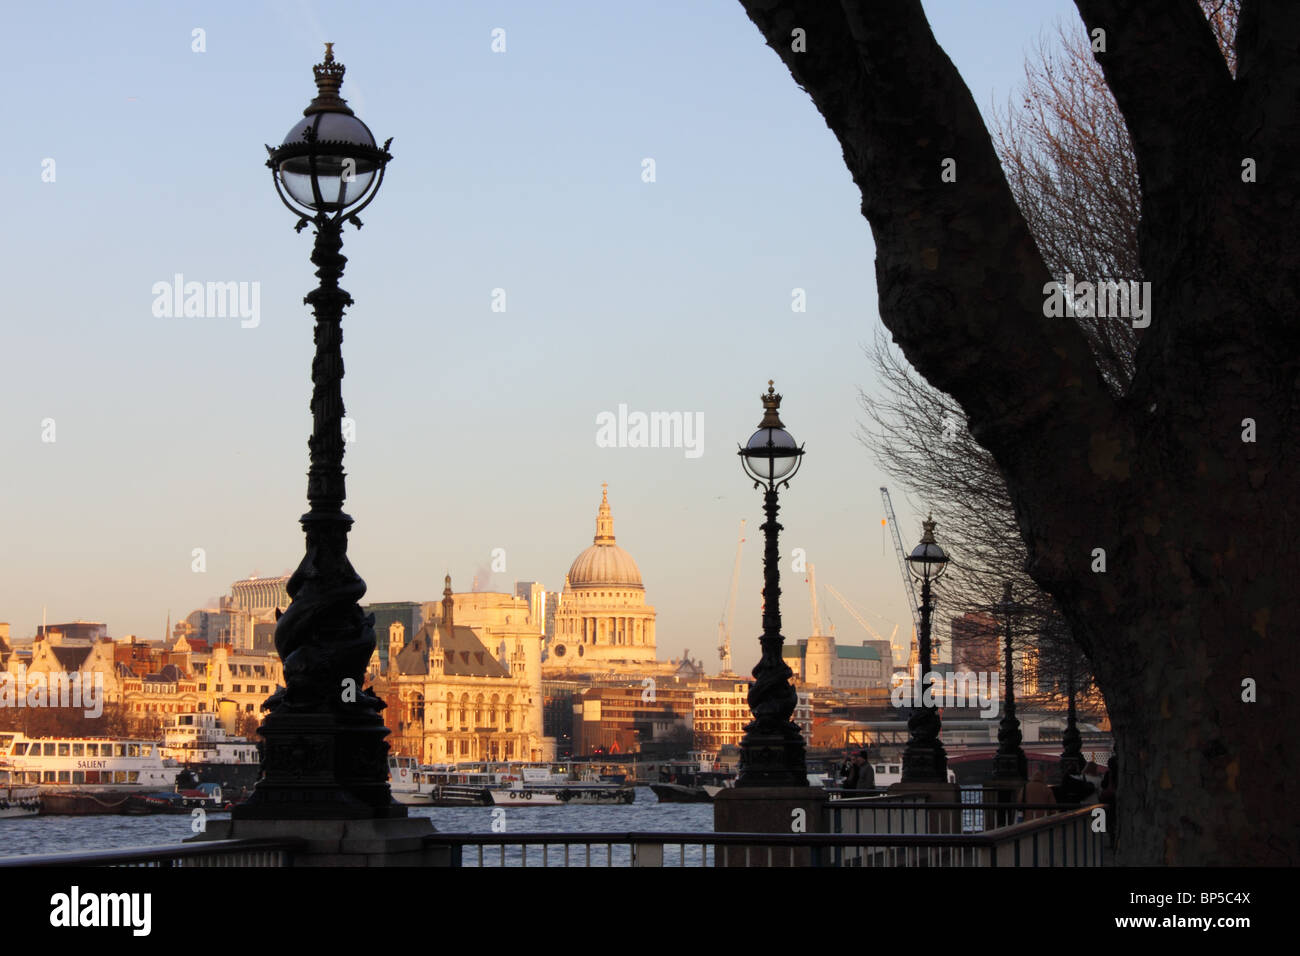 View across the River Thames to Saint Paul's Cathedral from South Bank, with lamp posts and part of tree in foreground, London Stock Photo